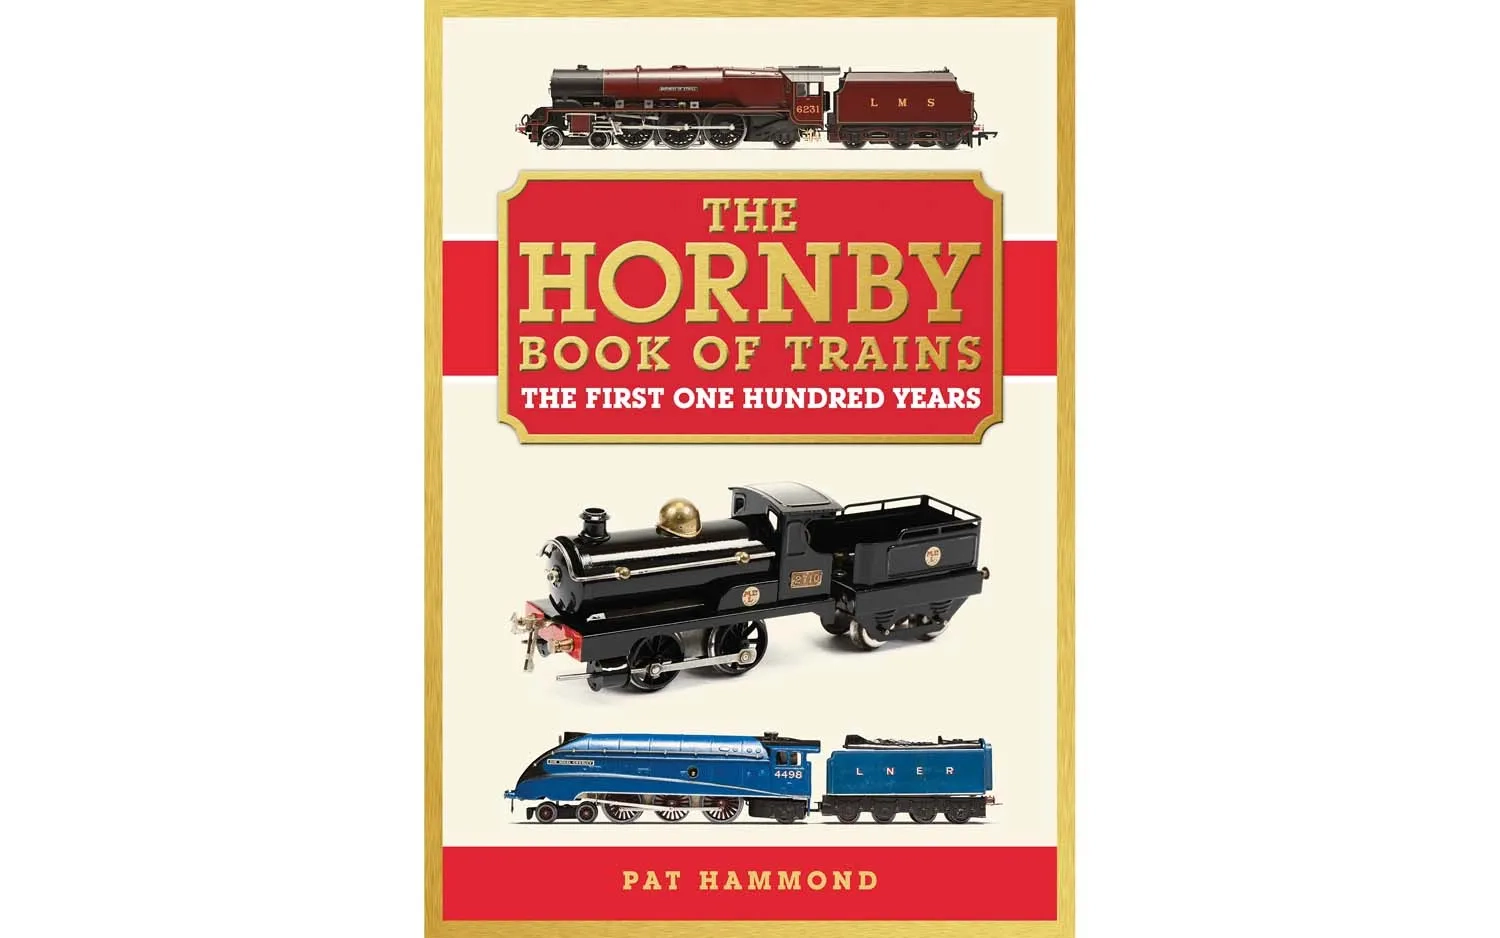 The Hornby Book of Trains - The Centenary Hard Back Edition by Pat Hammond